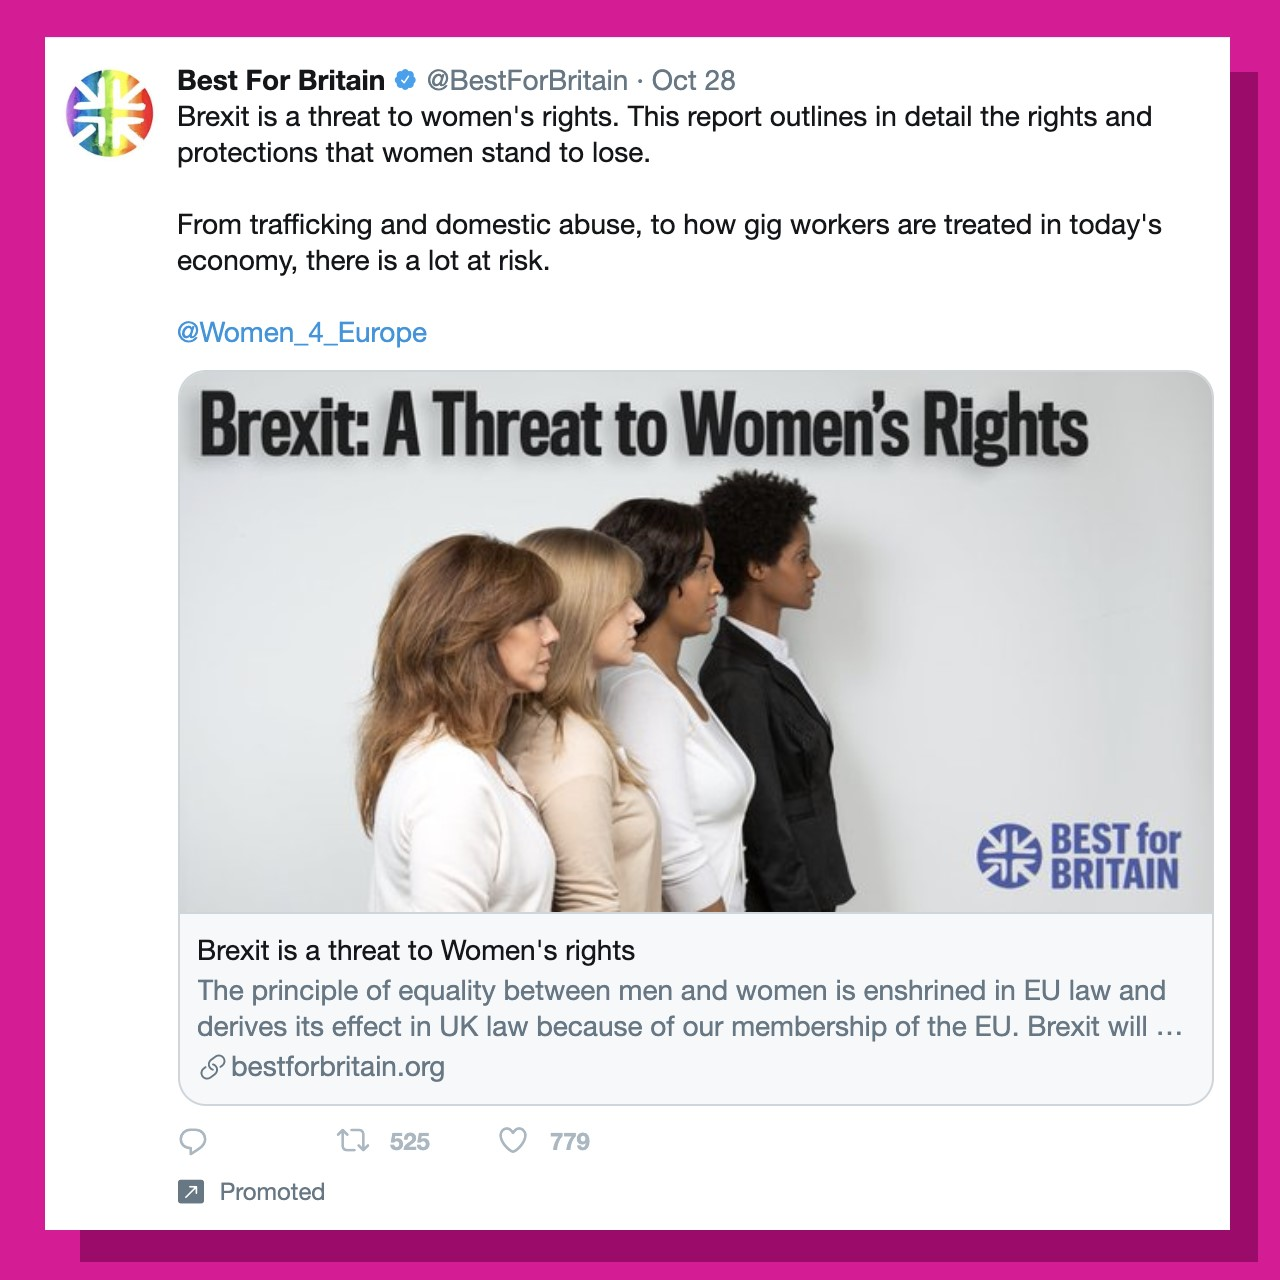 Ad placed by Best For Britain. The ad shows four women and says: "Brexit is a threat to women's rights".